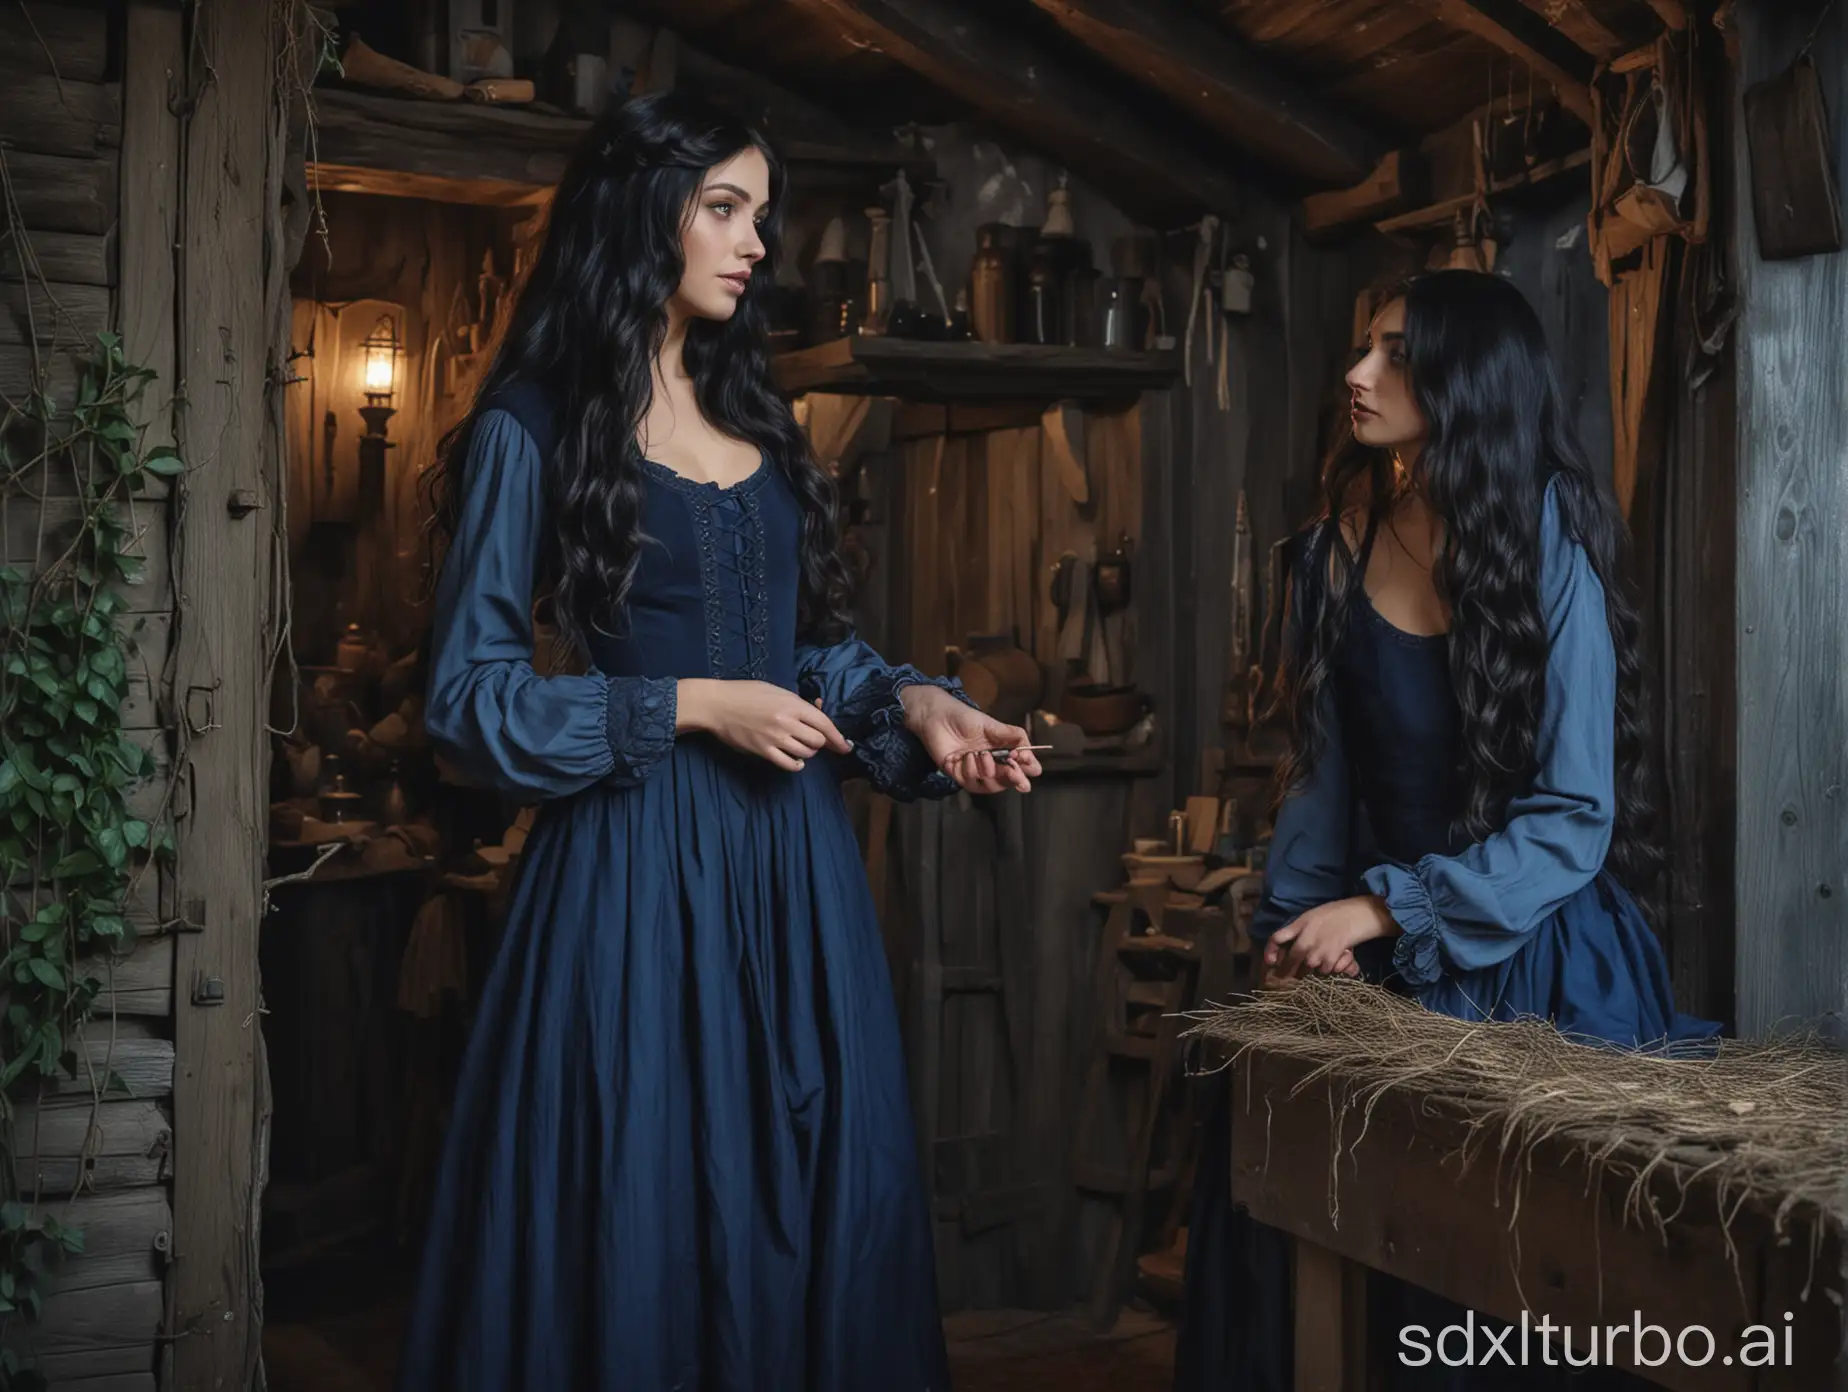 A beautiful girl in her twenties with long black hair curling at the ends, wearing (((a dark blue dress)))  with long sleeves of medieval style is talking to a kind gray-bearded old man with piercing blue eyes, in a long outfit in a small forest cottage during twilight